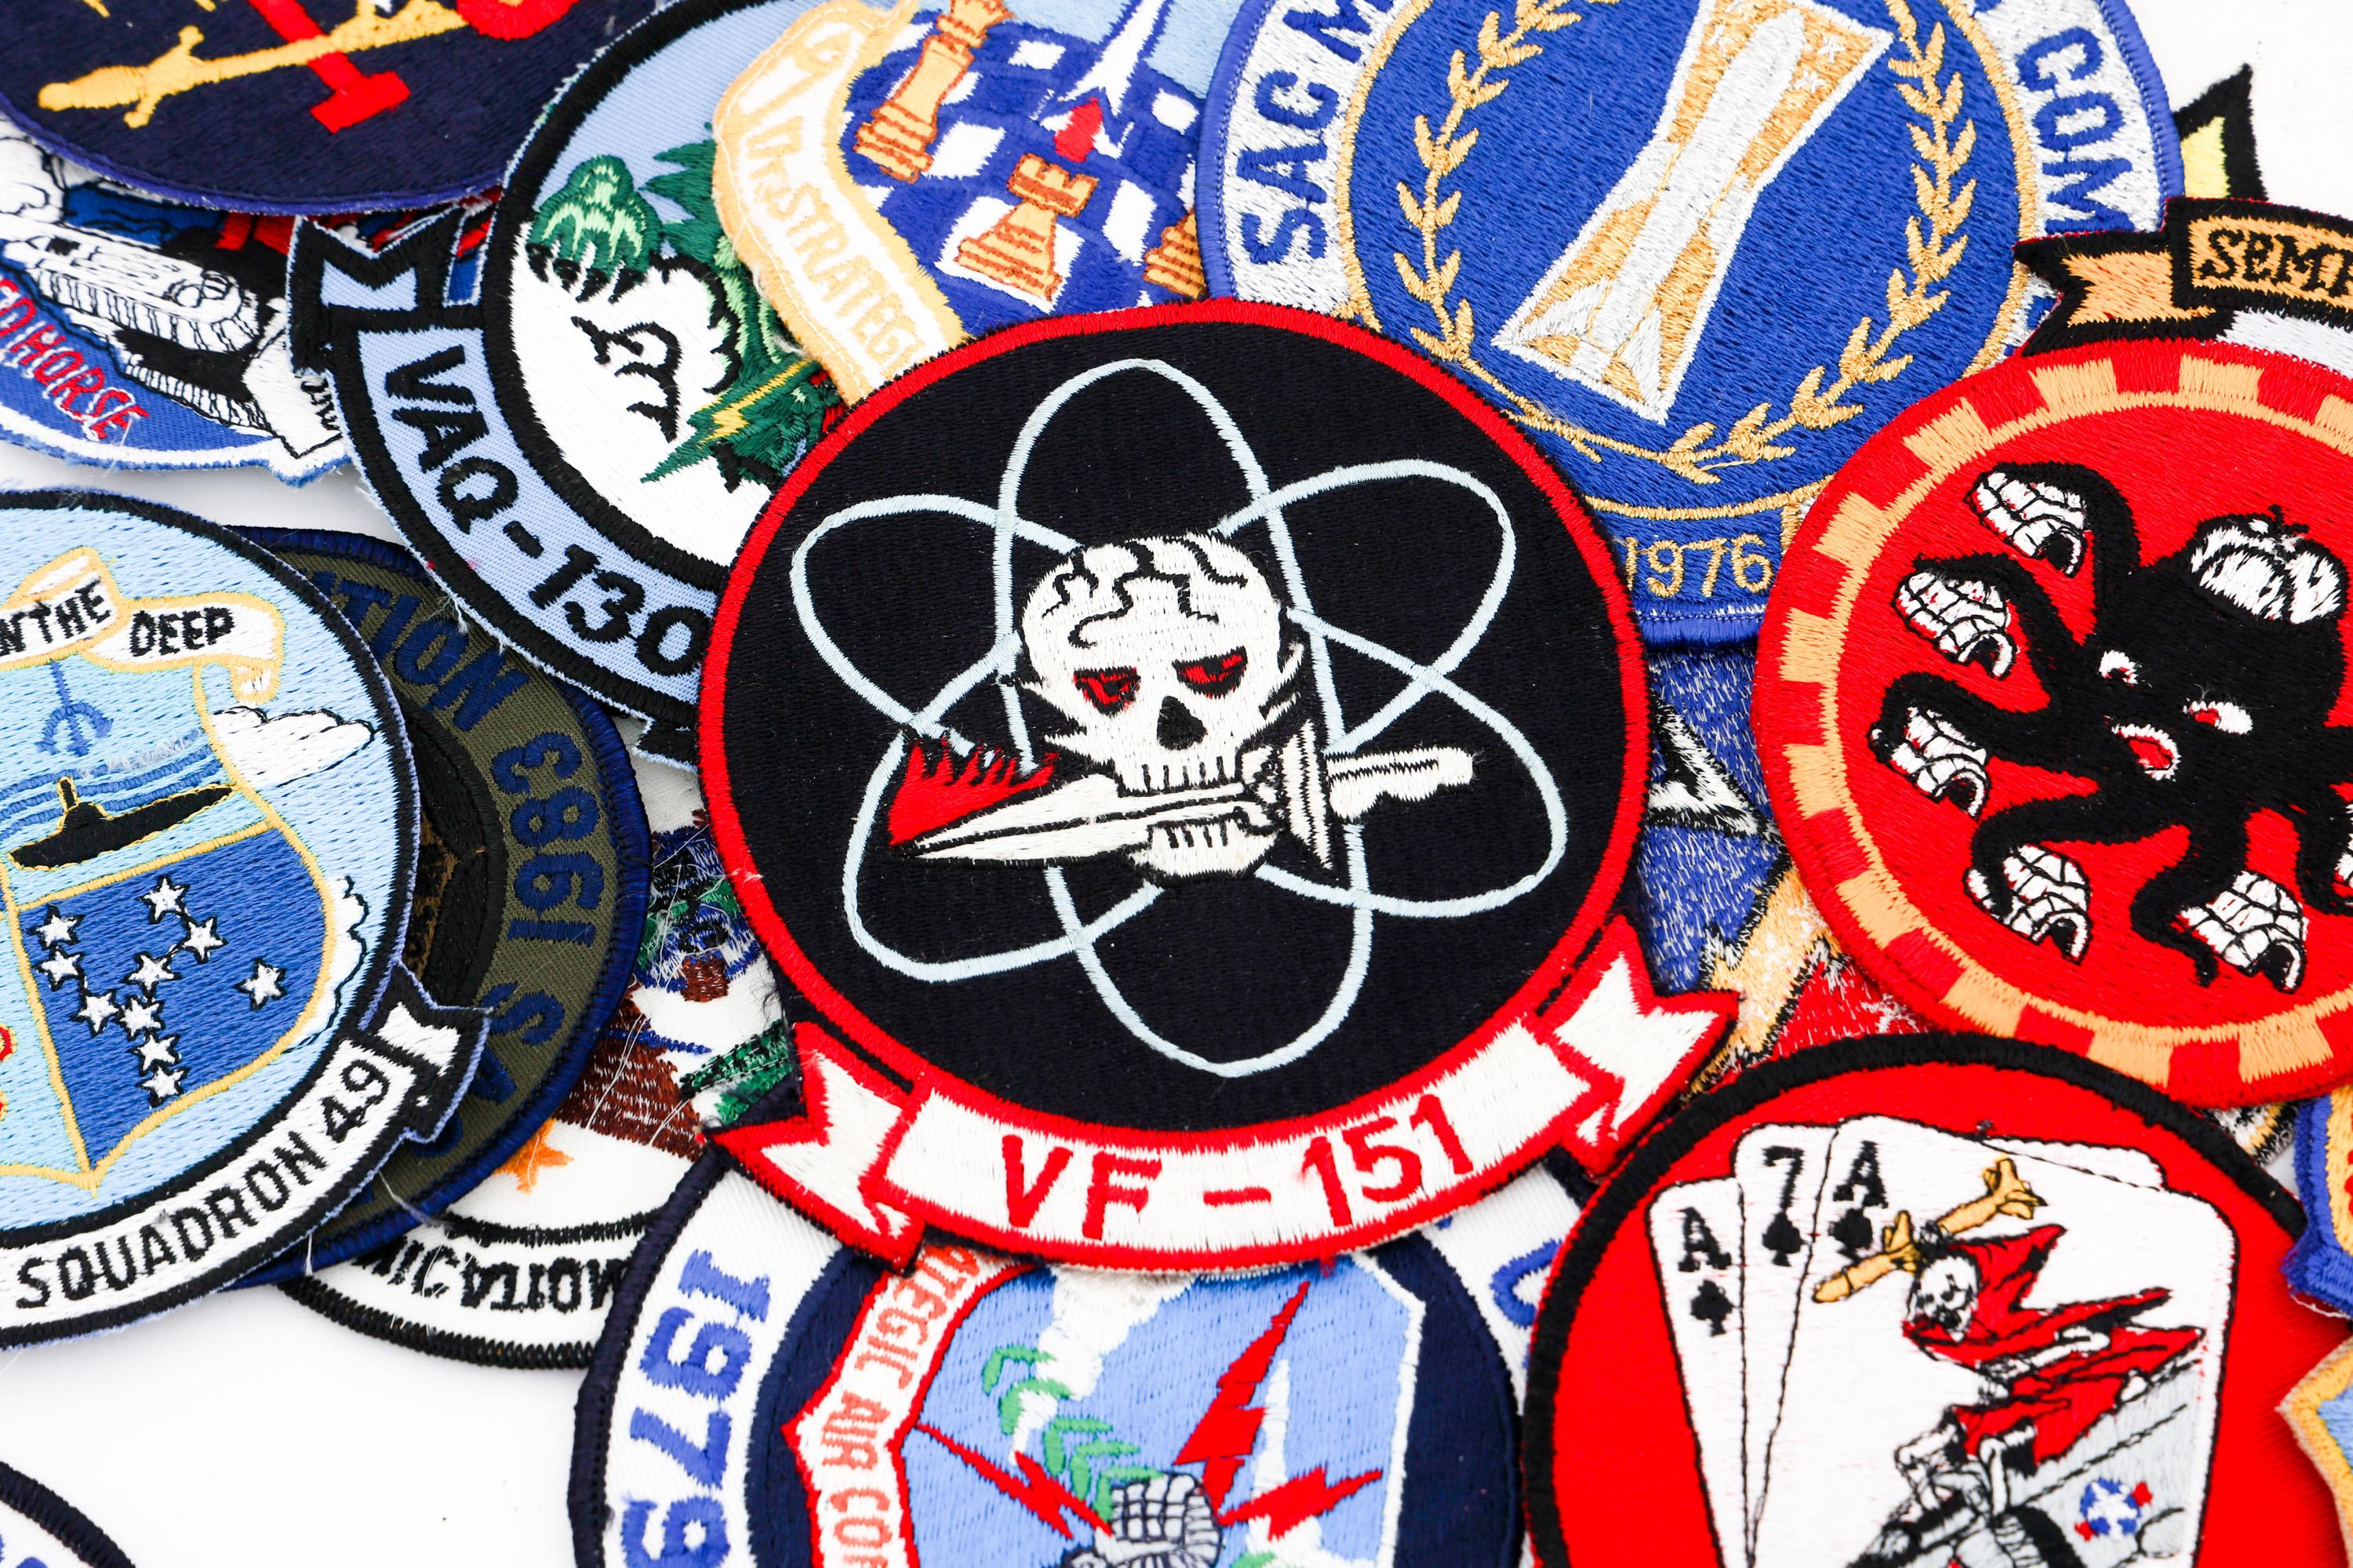 COLD WAR - CURRENT US NAVY & AIR FORCE PATCHES